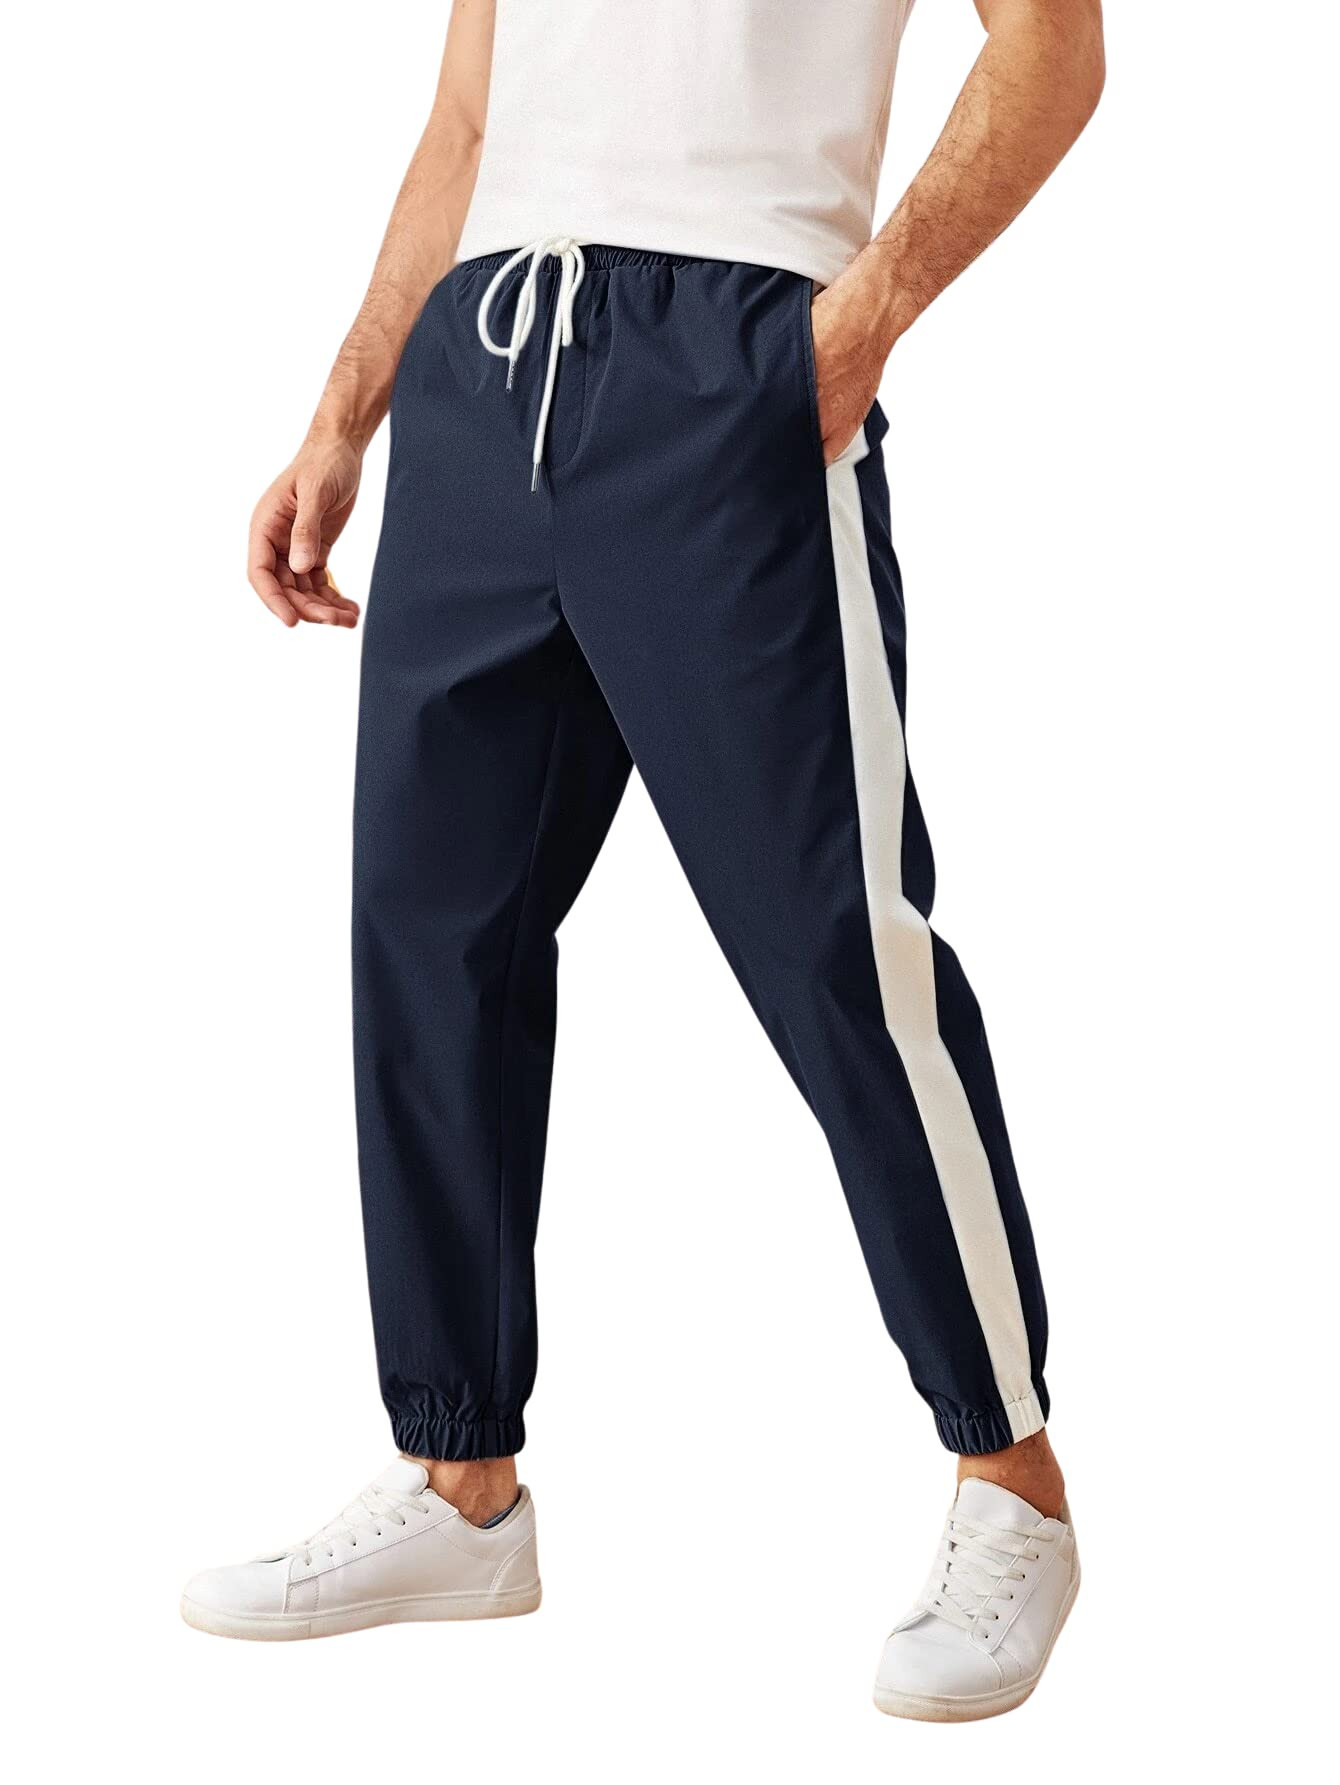 Polyester mens track pants at Rs.170/Piece in mumbai offer by Indiana Agency